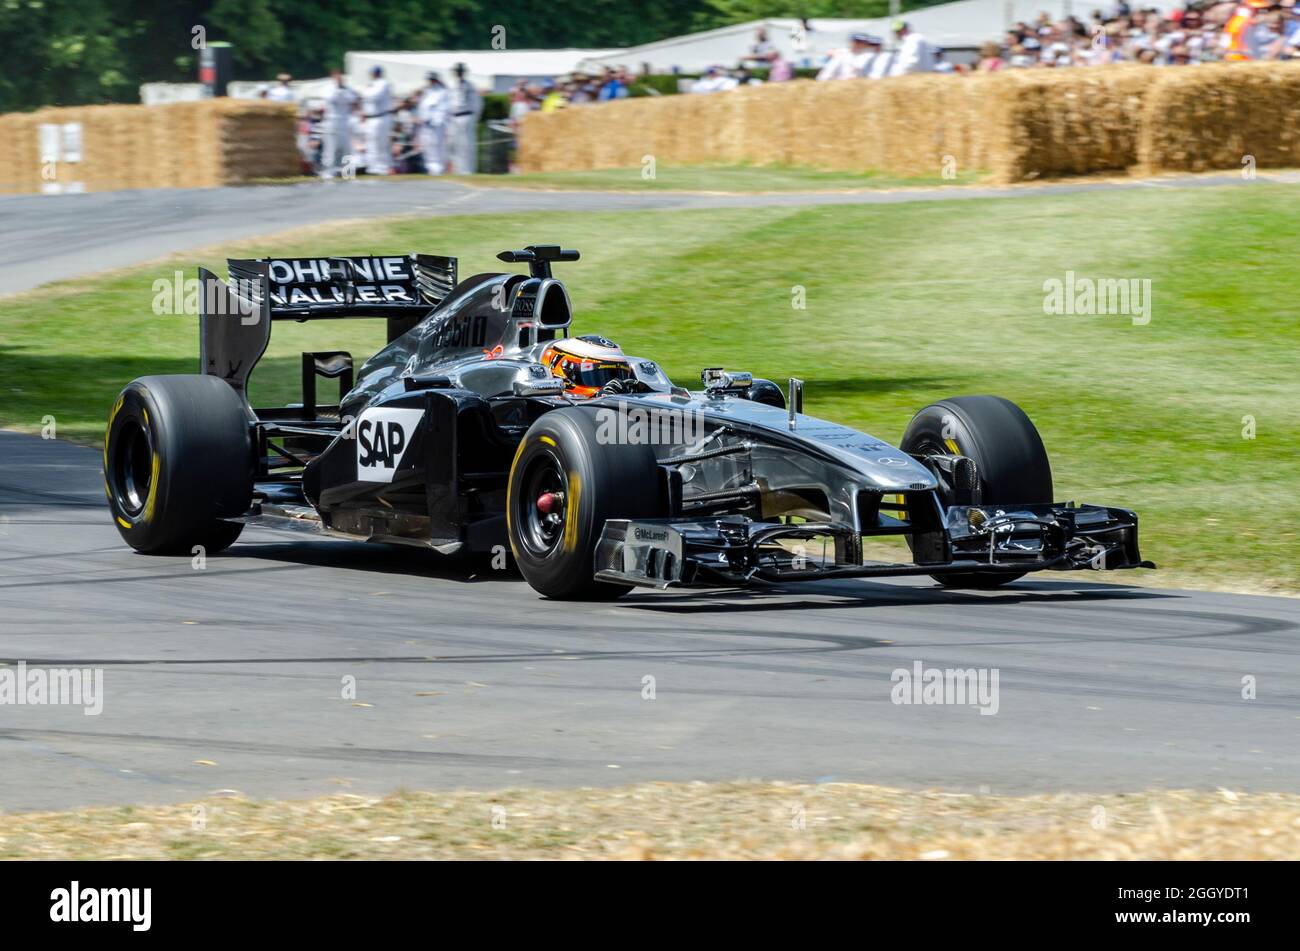 2011 McLaren MP4-26 Formula 1, F1, Grand Prix racing car at the Goodwood  Festival of Speed motor racing event 2014, driving up the hill climb track  Stock Photo - Alamy